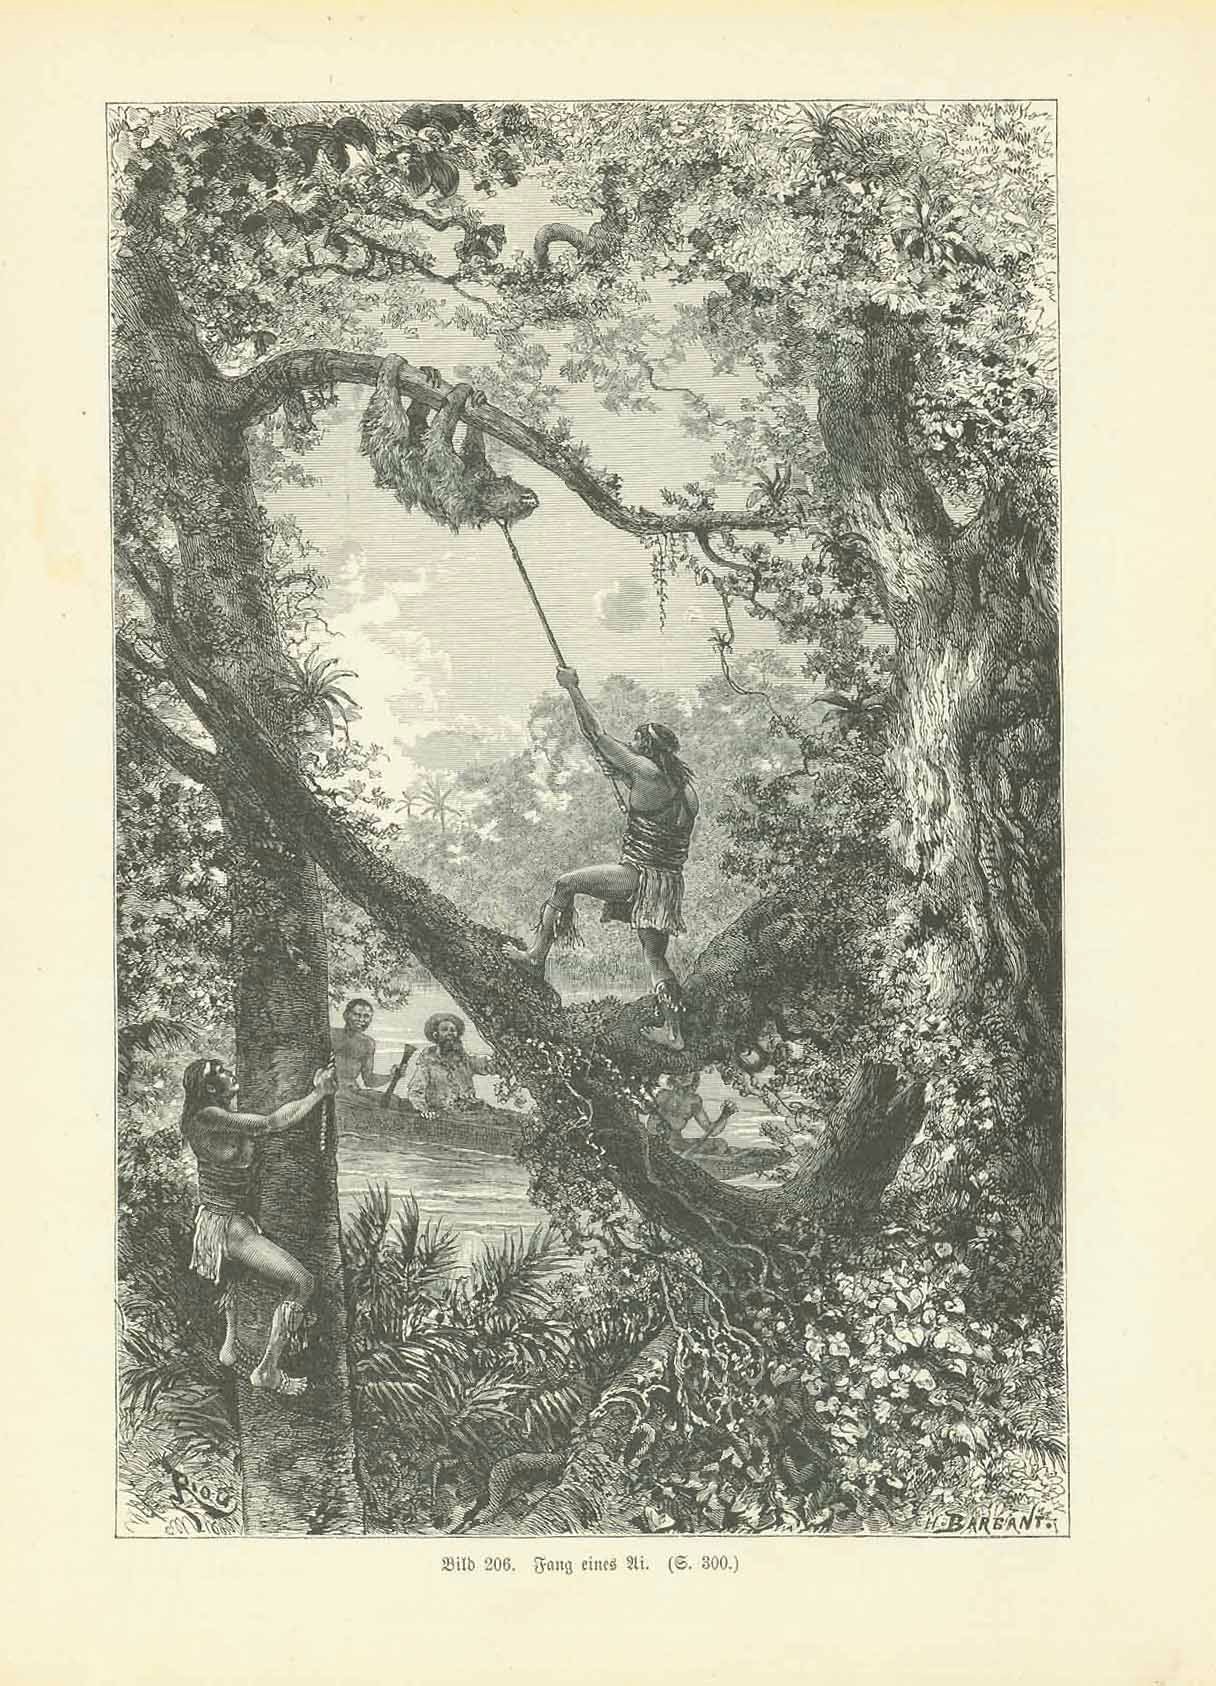 "Fang eines Ei" (hunting a sloth, Faultier)  Wood engraving published 1904.  Original antique print , interior design, wall decoration, ideas, idea, gift ideas, present, vintage, charming, special, decoration, home interior, living room design